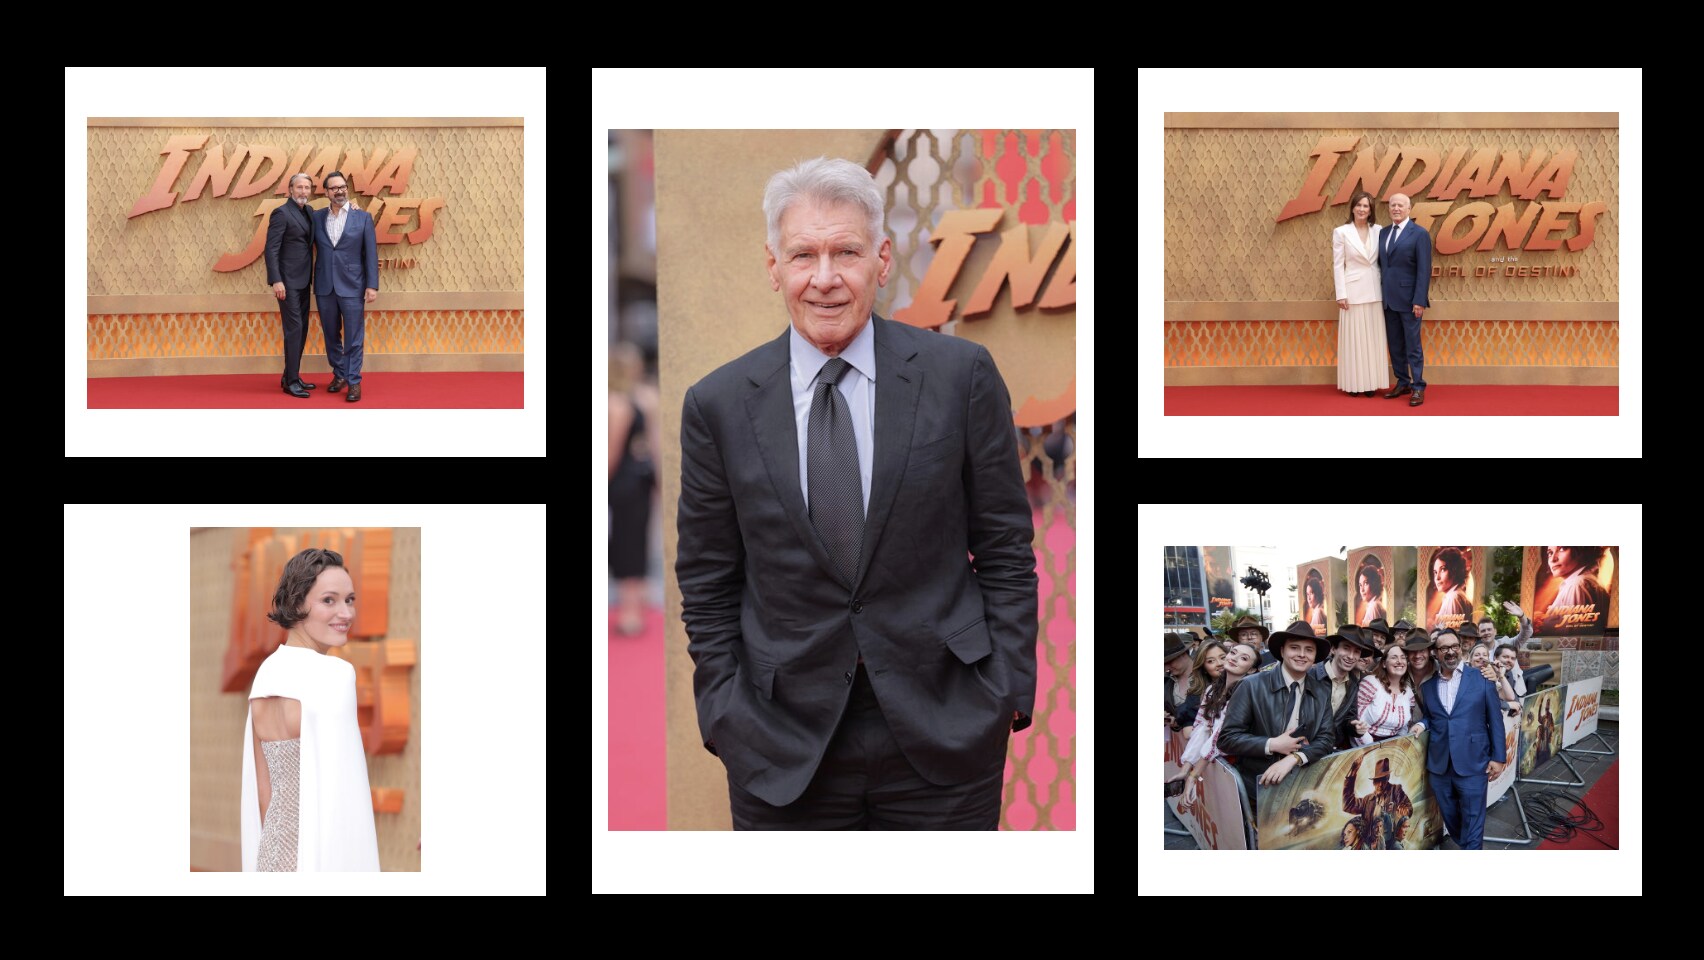 Indiana Jones and the Dial of Destiny UK Premiere collage of images. Top left is Mads Mikkelsen and James Mangold, top right is Kathleen Kennedy and Frank Marshall, bottom left is Phoebe Waller-Bridge, bottom right is James Mangold and Indiana Jones Fans, middle image is of Harrison Ford.